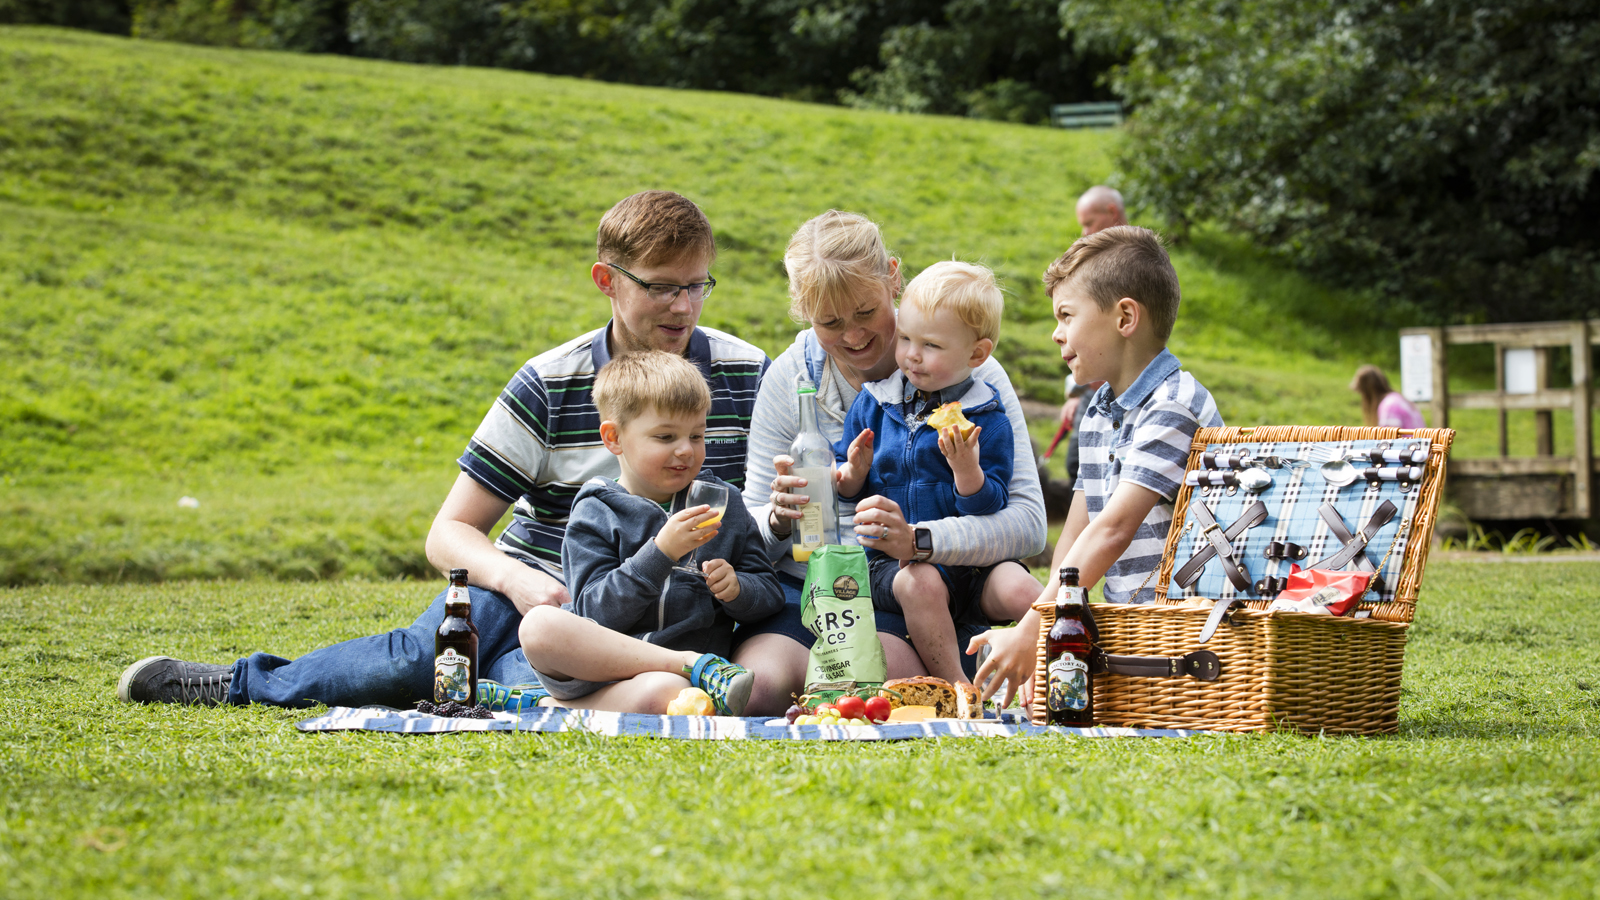 Children's Picnic in the Countryside